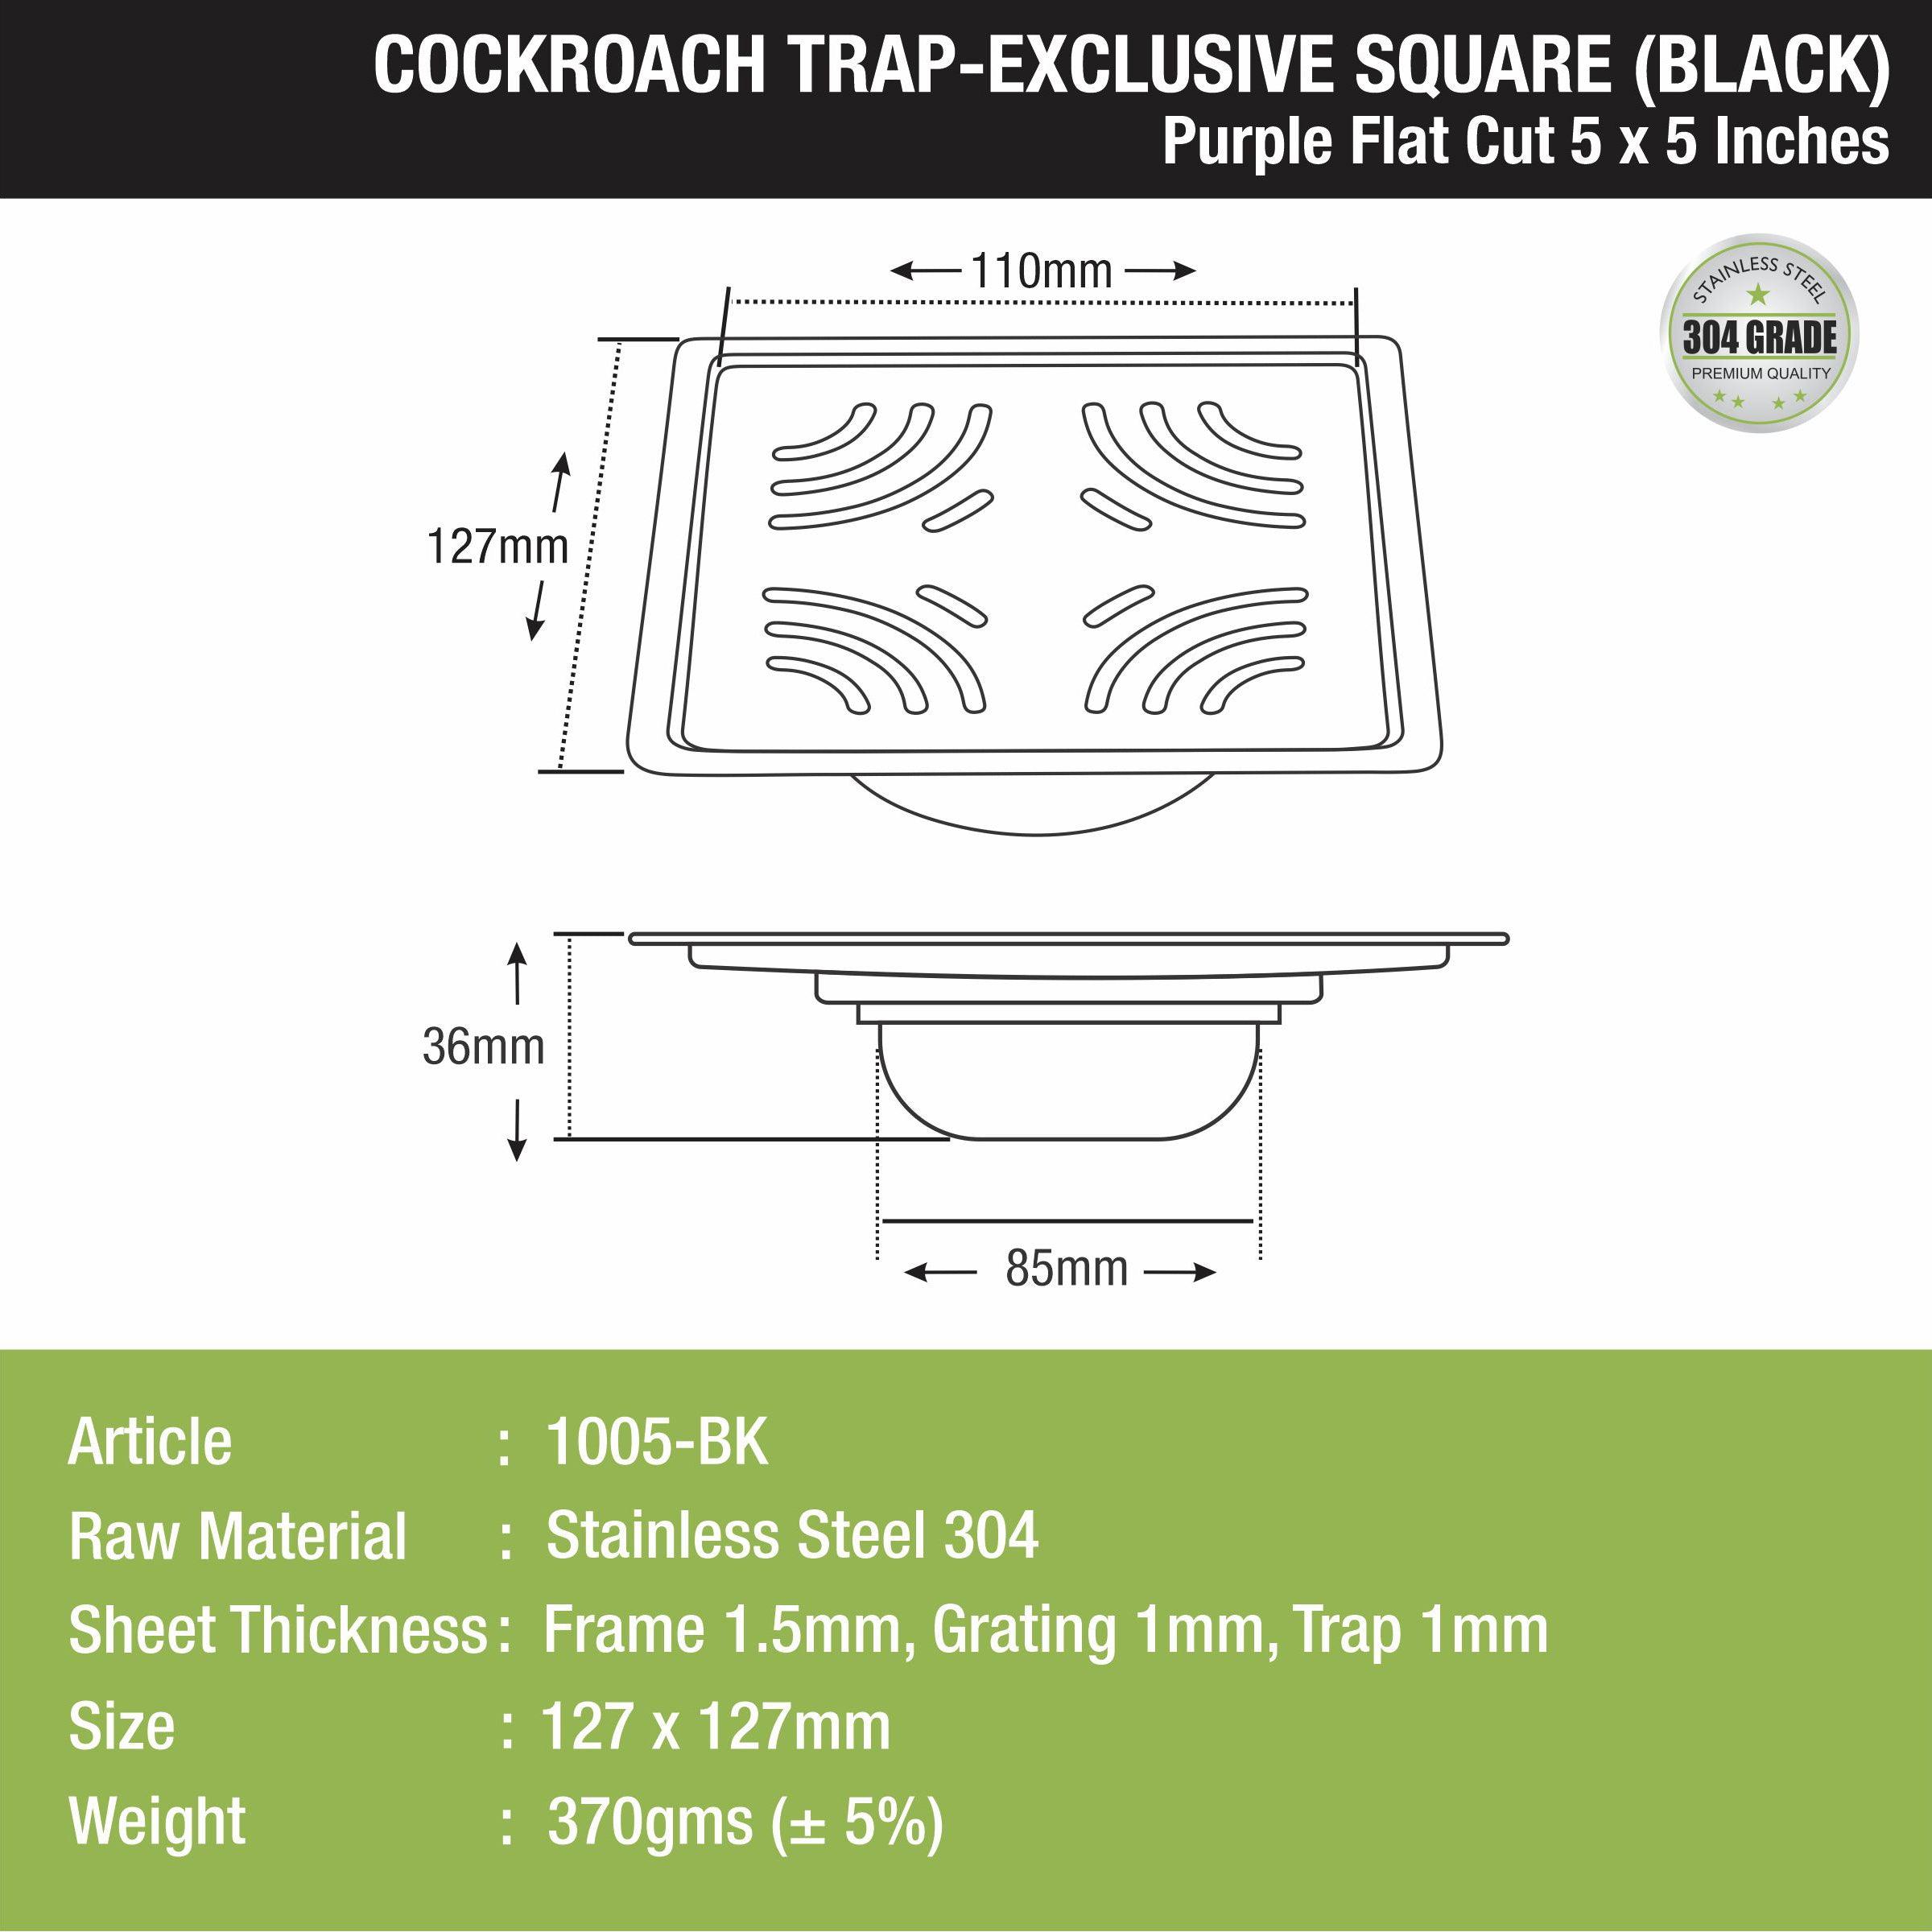 Purple Exclusive Square Flat Cut Floor Drain in Black PVD Coating (5 x 5 Inches) with Cockroach Trap size and measurement 